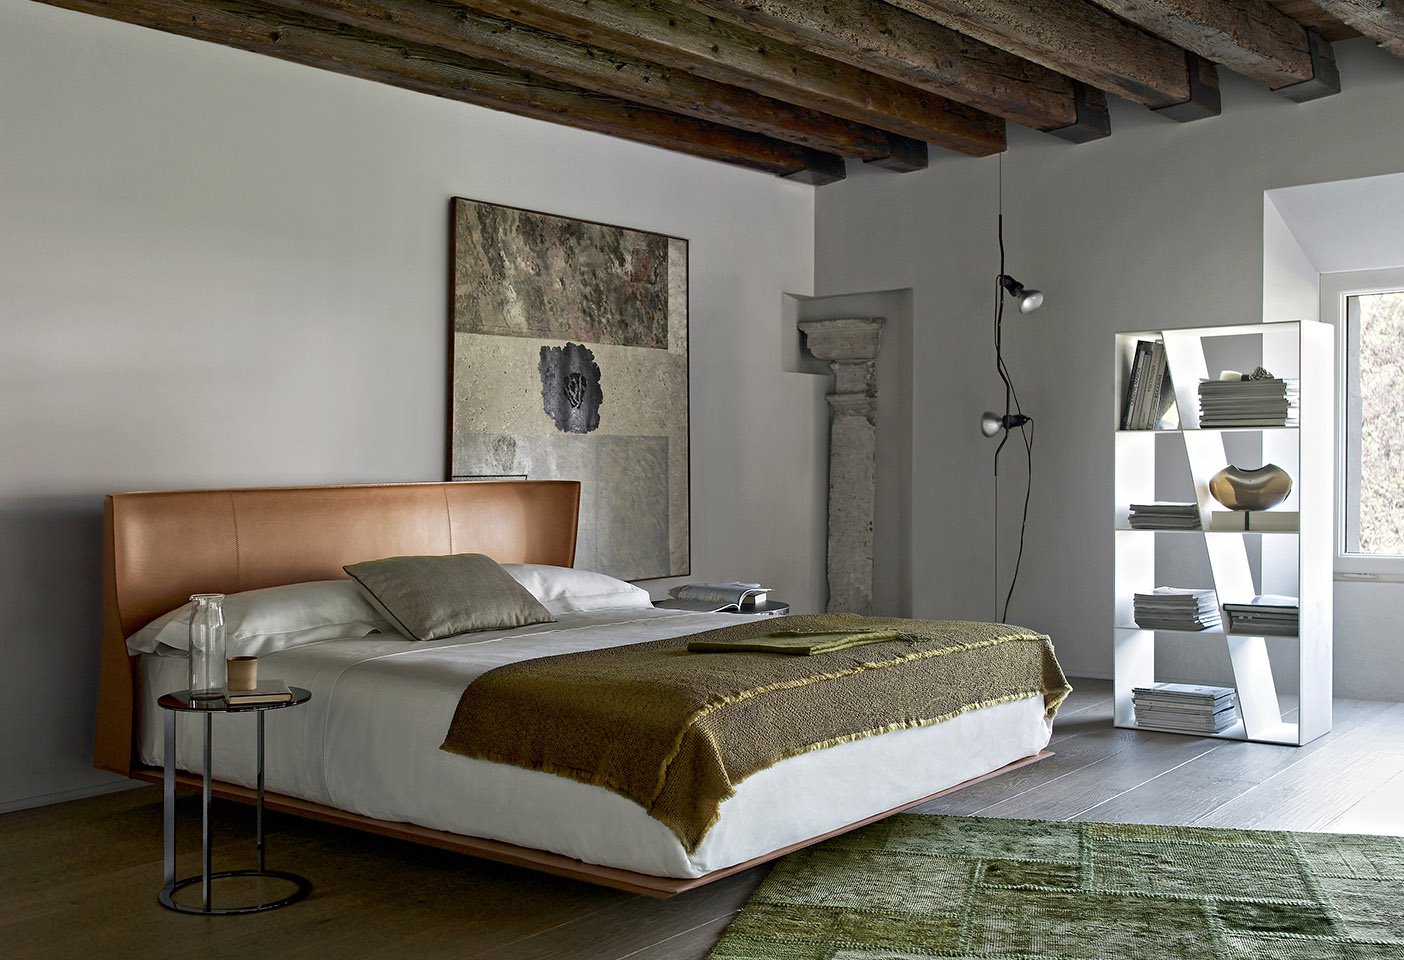 The Gabriele and Oscar Buratti’s Alys Bed for B&B Italia 'is beautifully crafted and finely balanced in every aspect'. Photo c/o B&B Italia. 